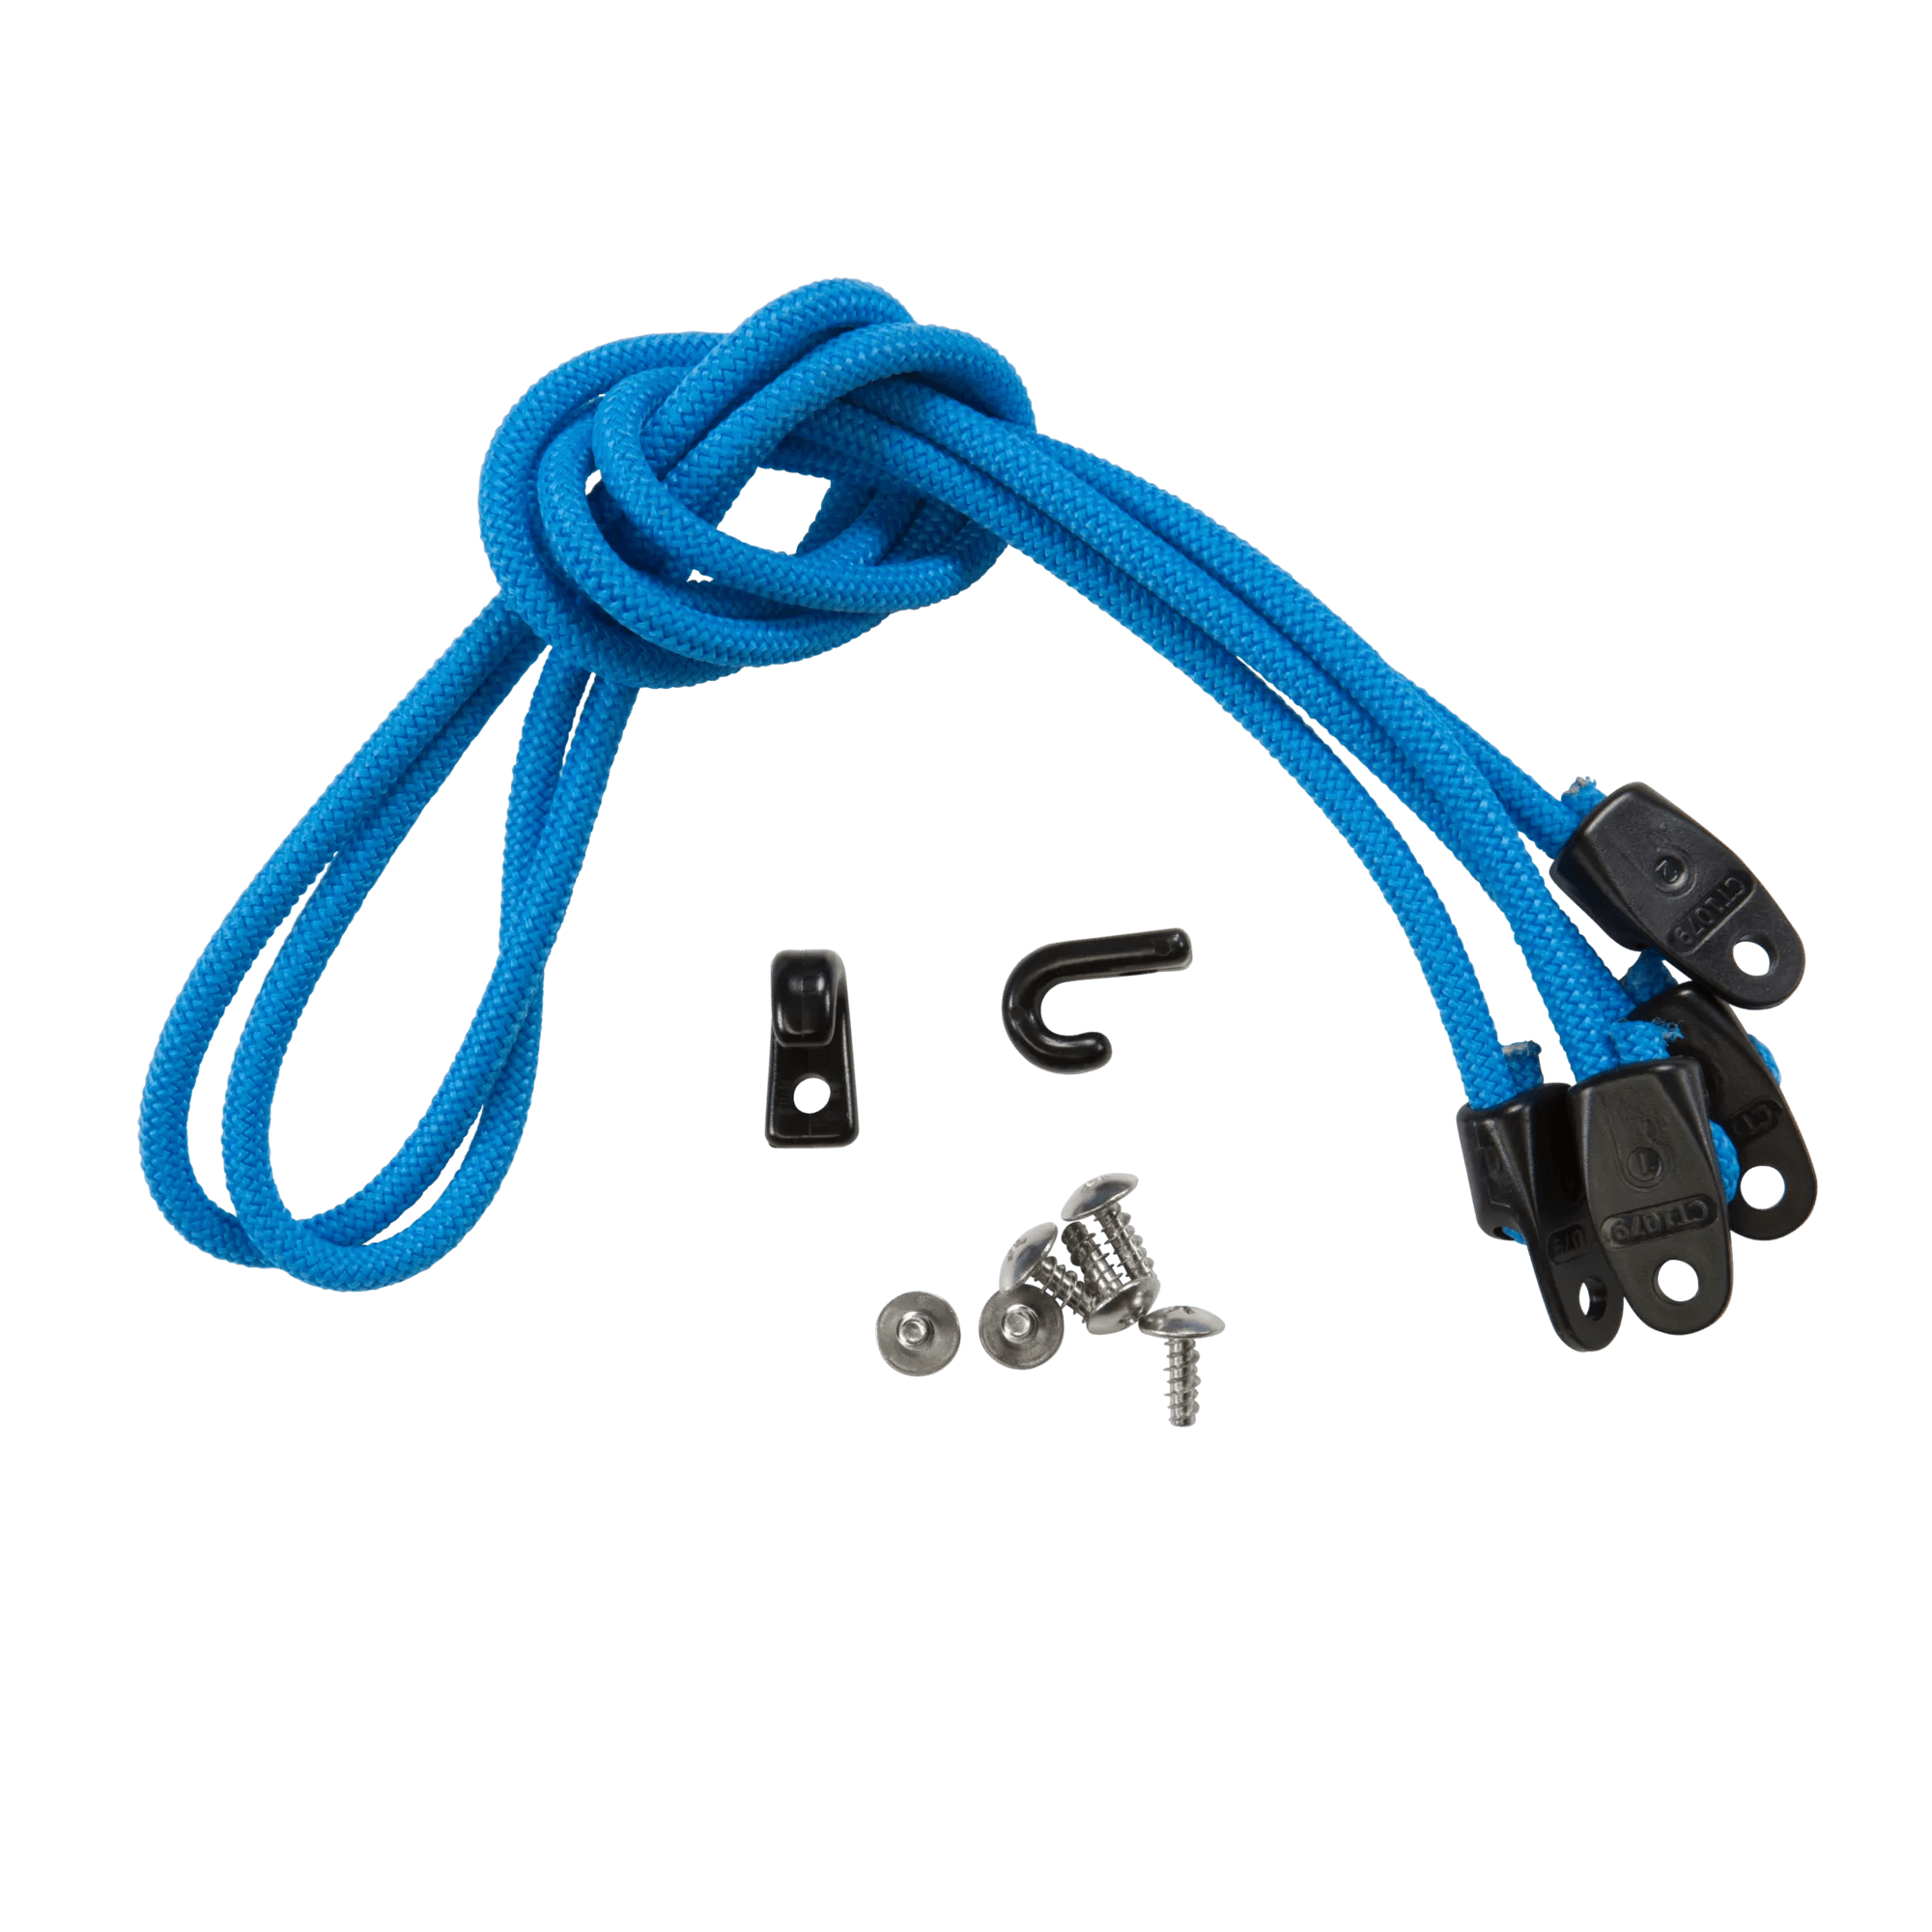 PELICAN - Electric Blue 38" (96.5 cm) Multi-Purpose Bungee Cord -  - PS1703 - ISO